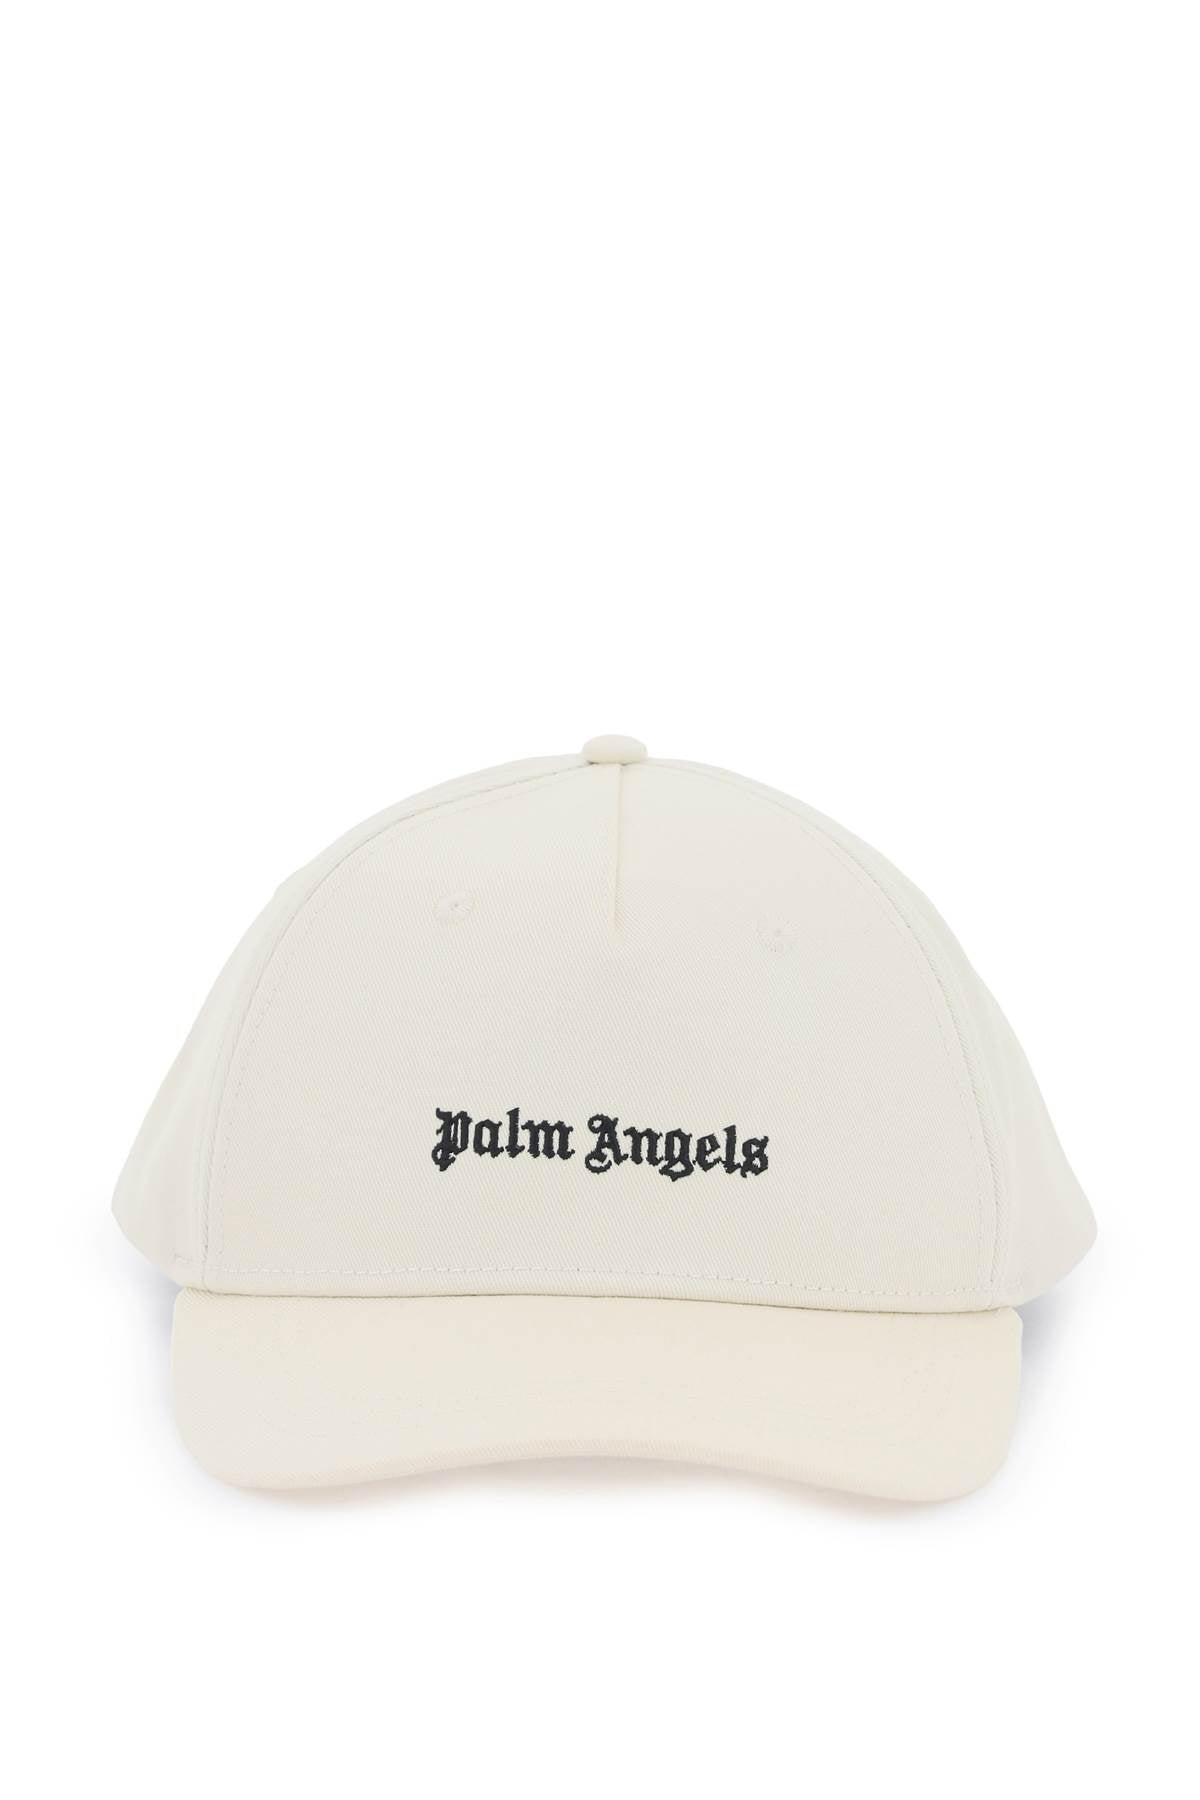 Palm angels embroidered logo baseball cap with-0